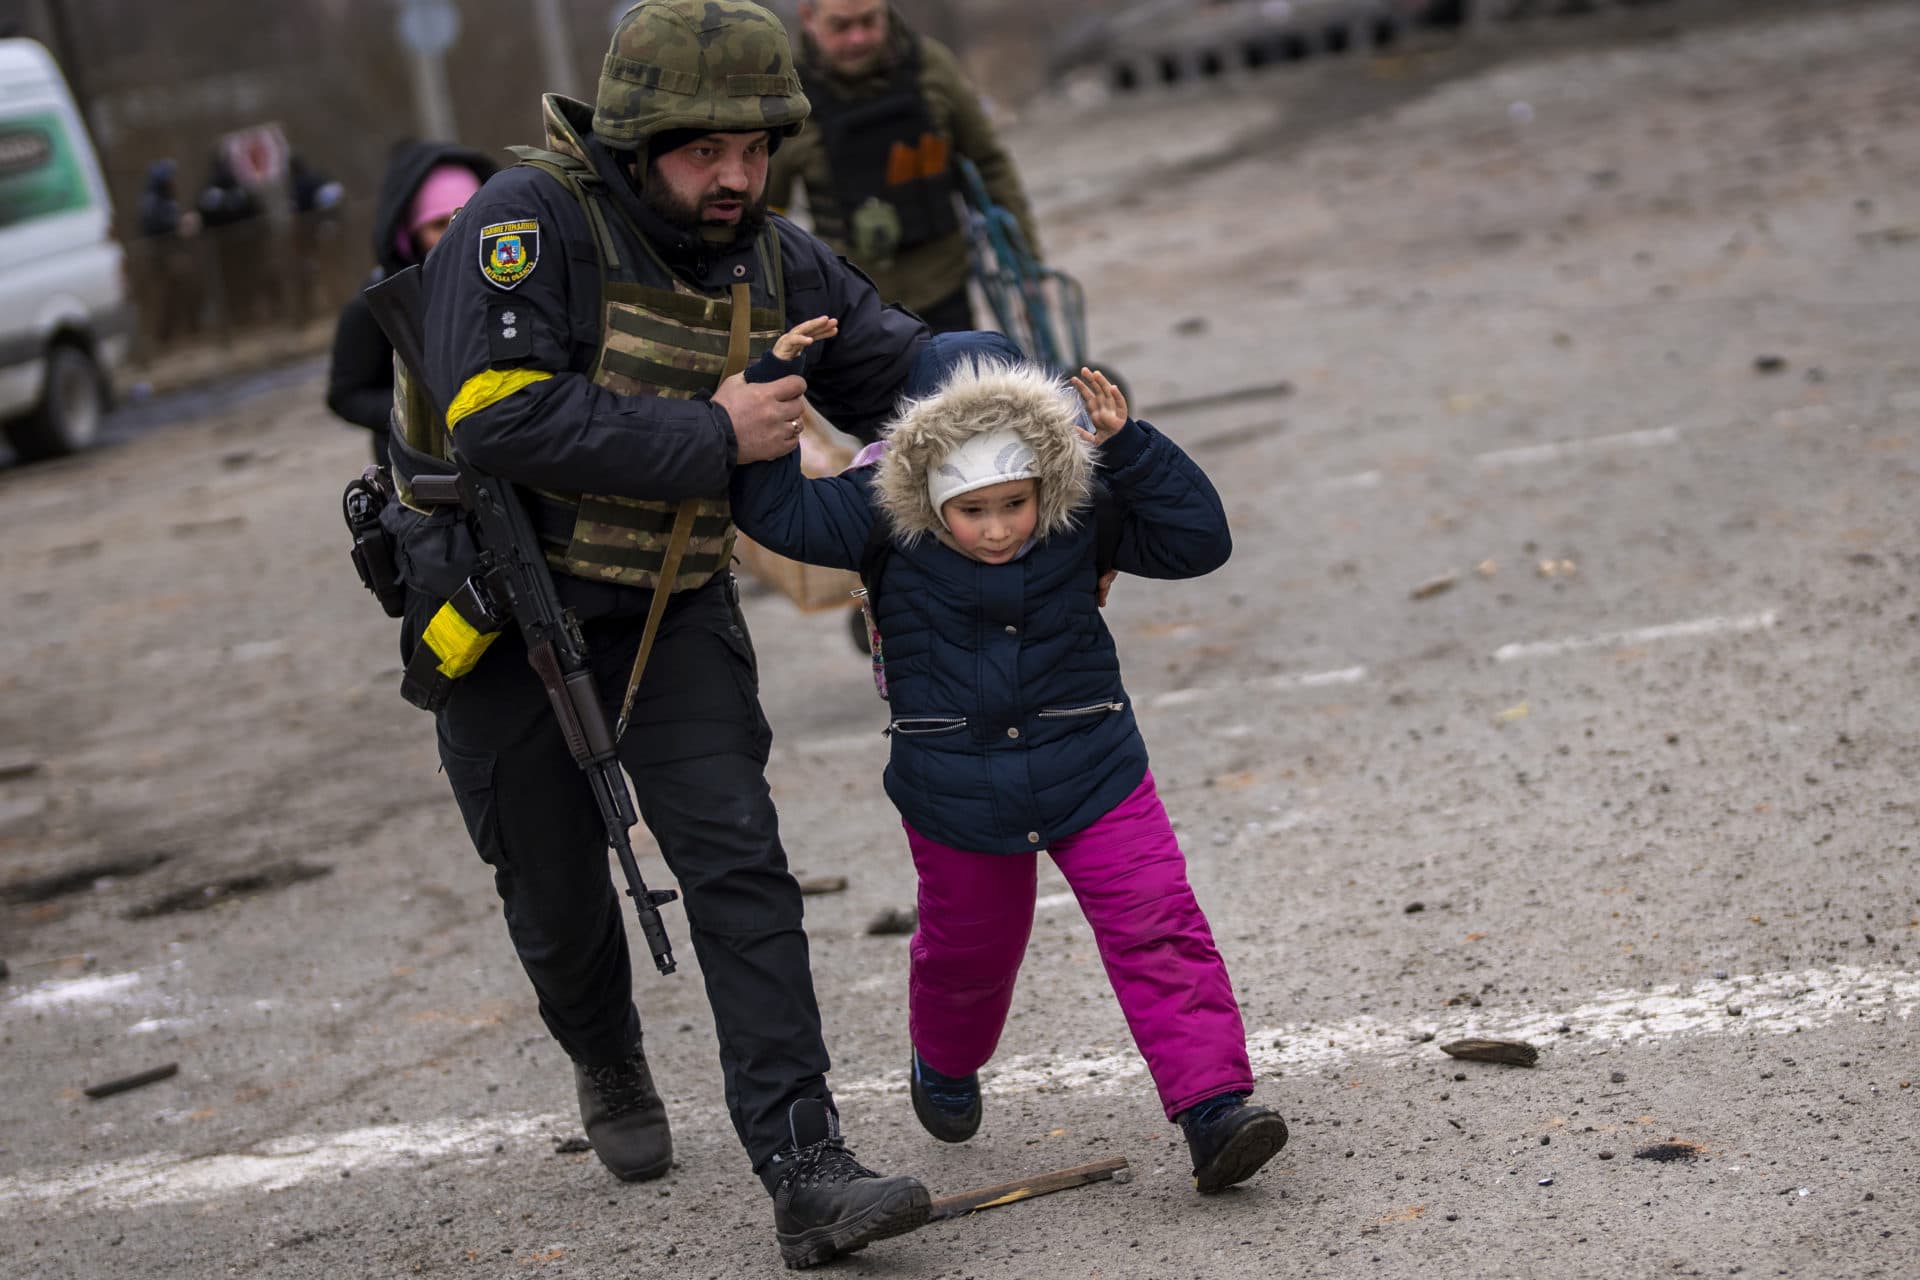 A Ukrainian police officer runs while holding a child as the artillery echoes nearby, while fleeing Irpin on the outskirts of Kyiv, Ukraine, Monday, March 7, 2022. (Emilio Morenatti/AP)